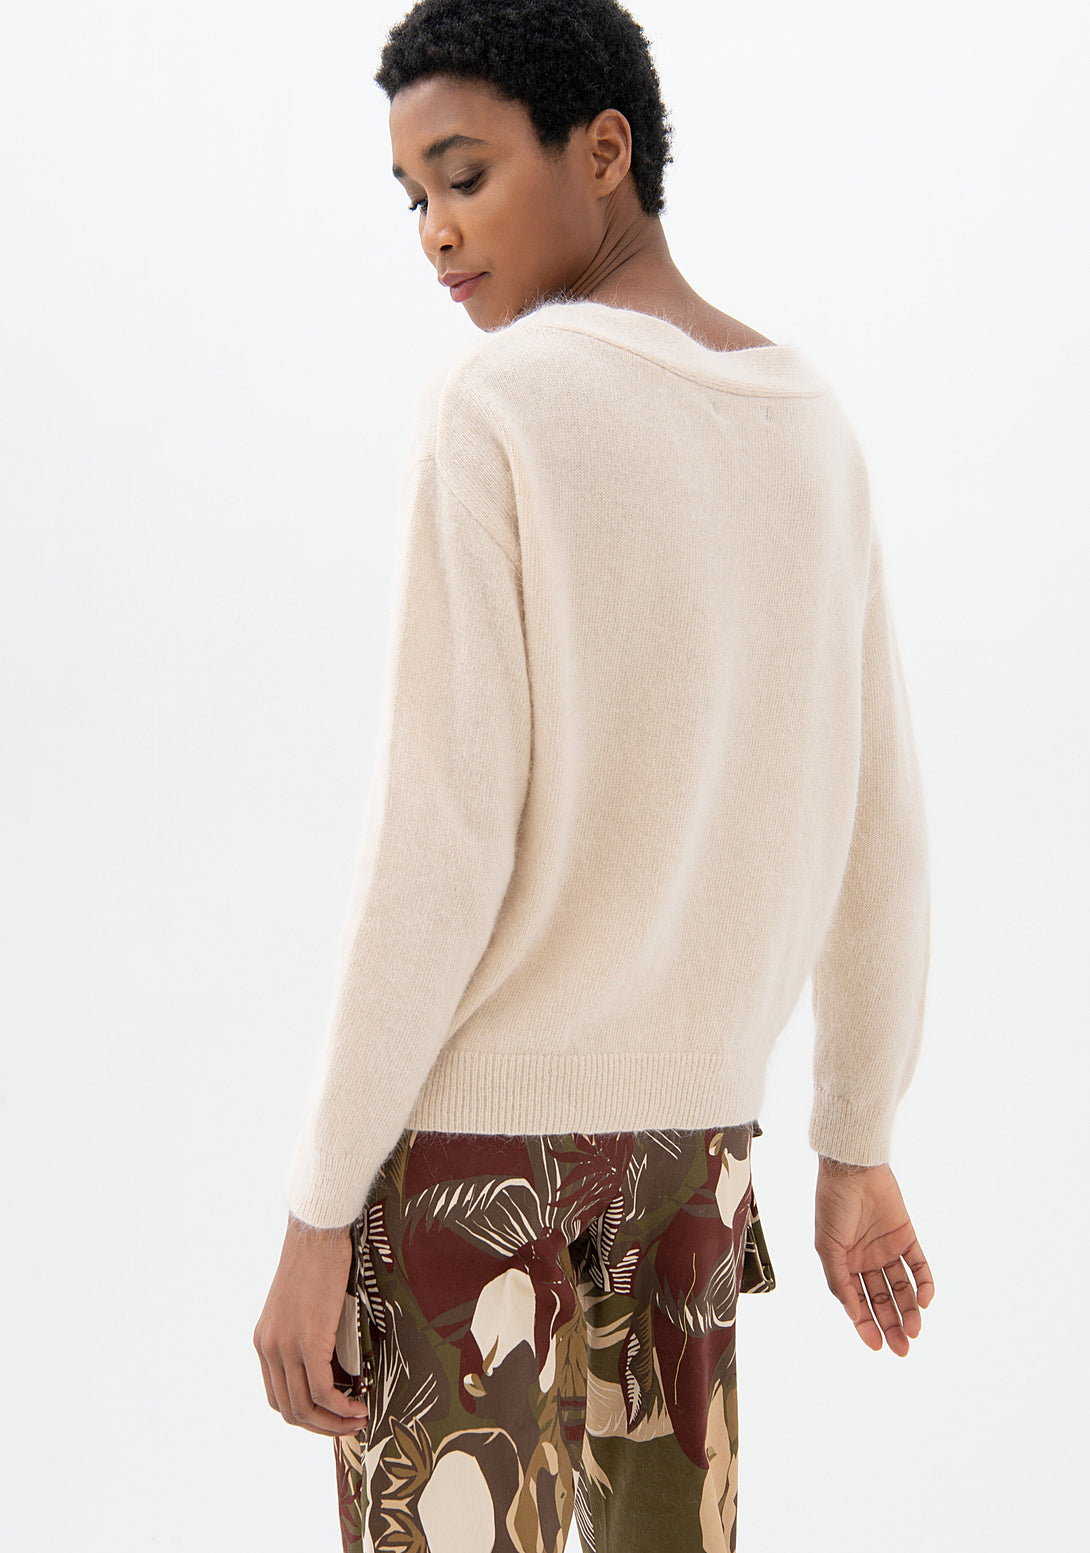 Knitwear wide fit with angora